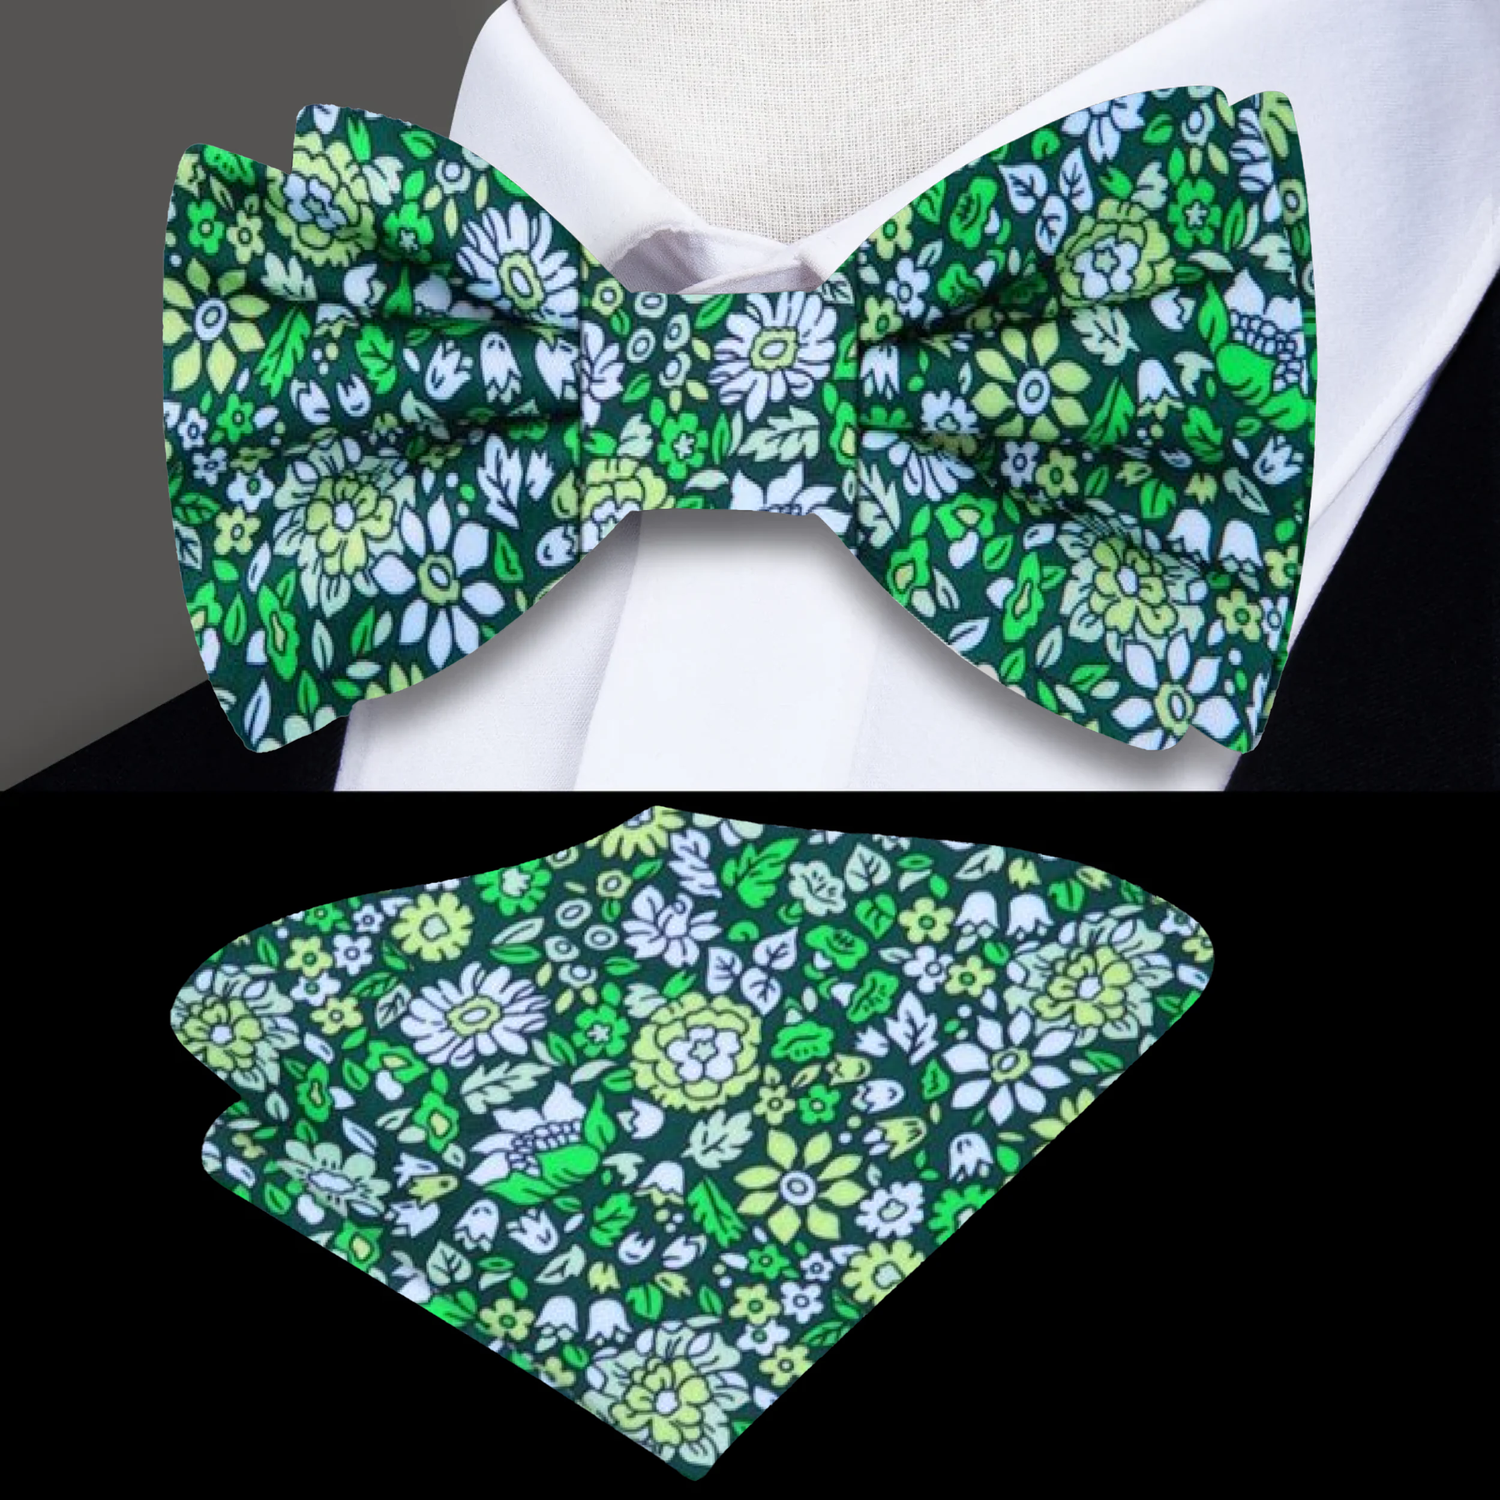 Shades of Green Intricate Floral Bow Tie and Square||Dark Green, Light Green